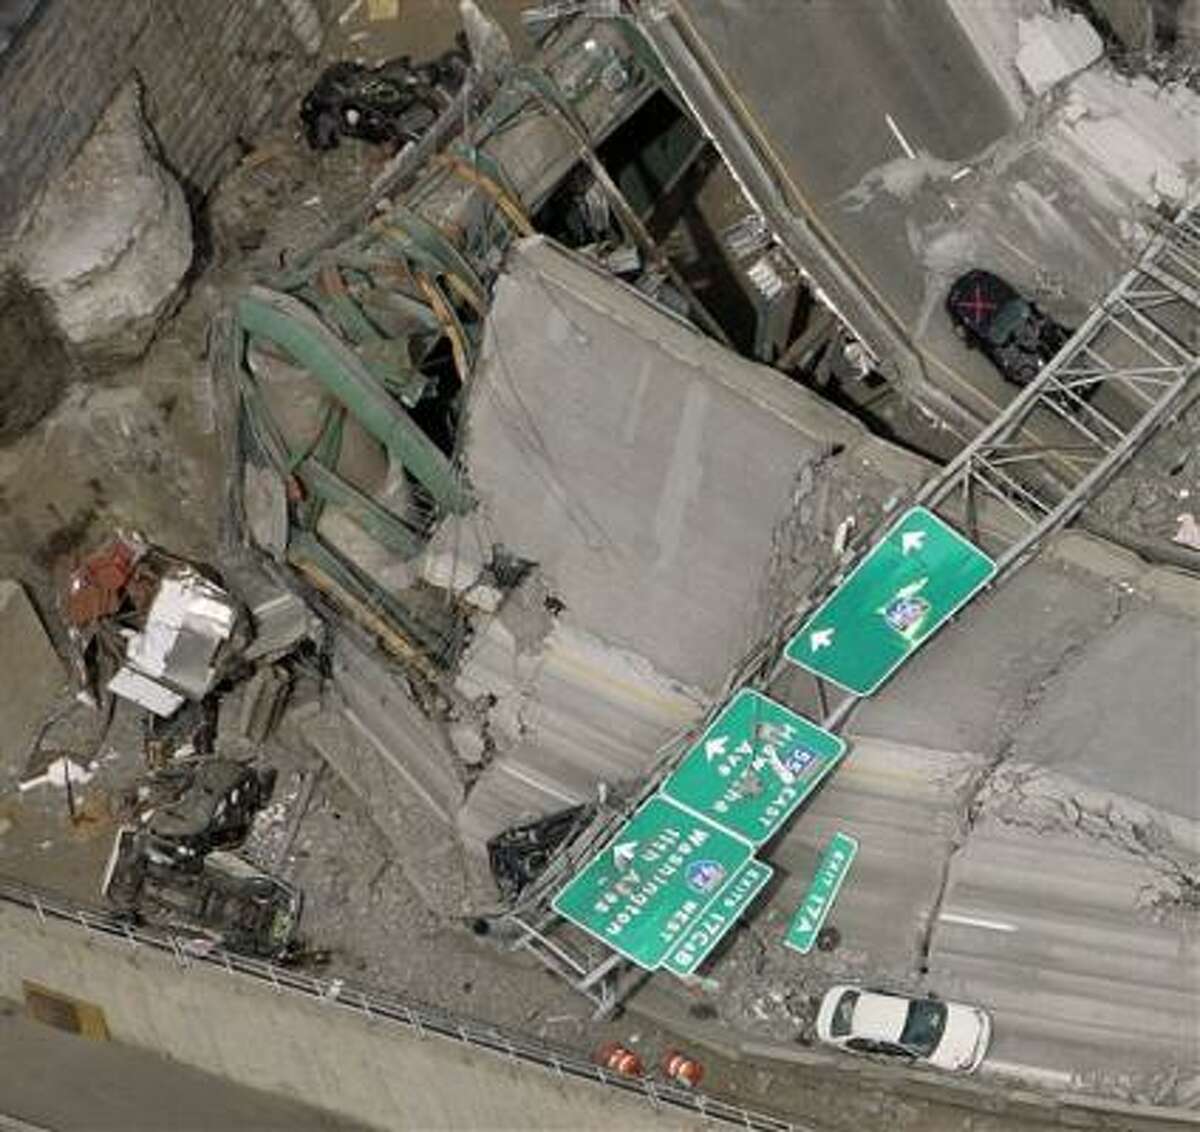 Rescuers are continuing today searching for bodies after the collapse of the Interstate 35 West bridge in Minneapolis.